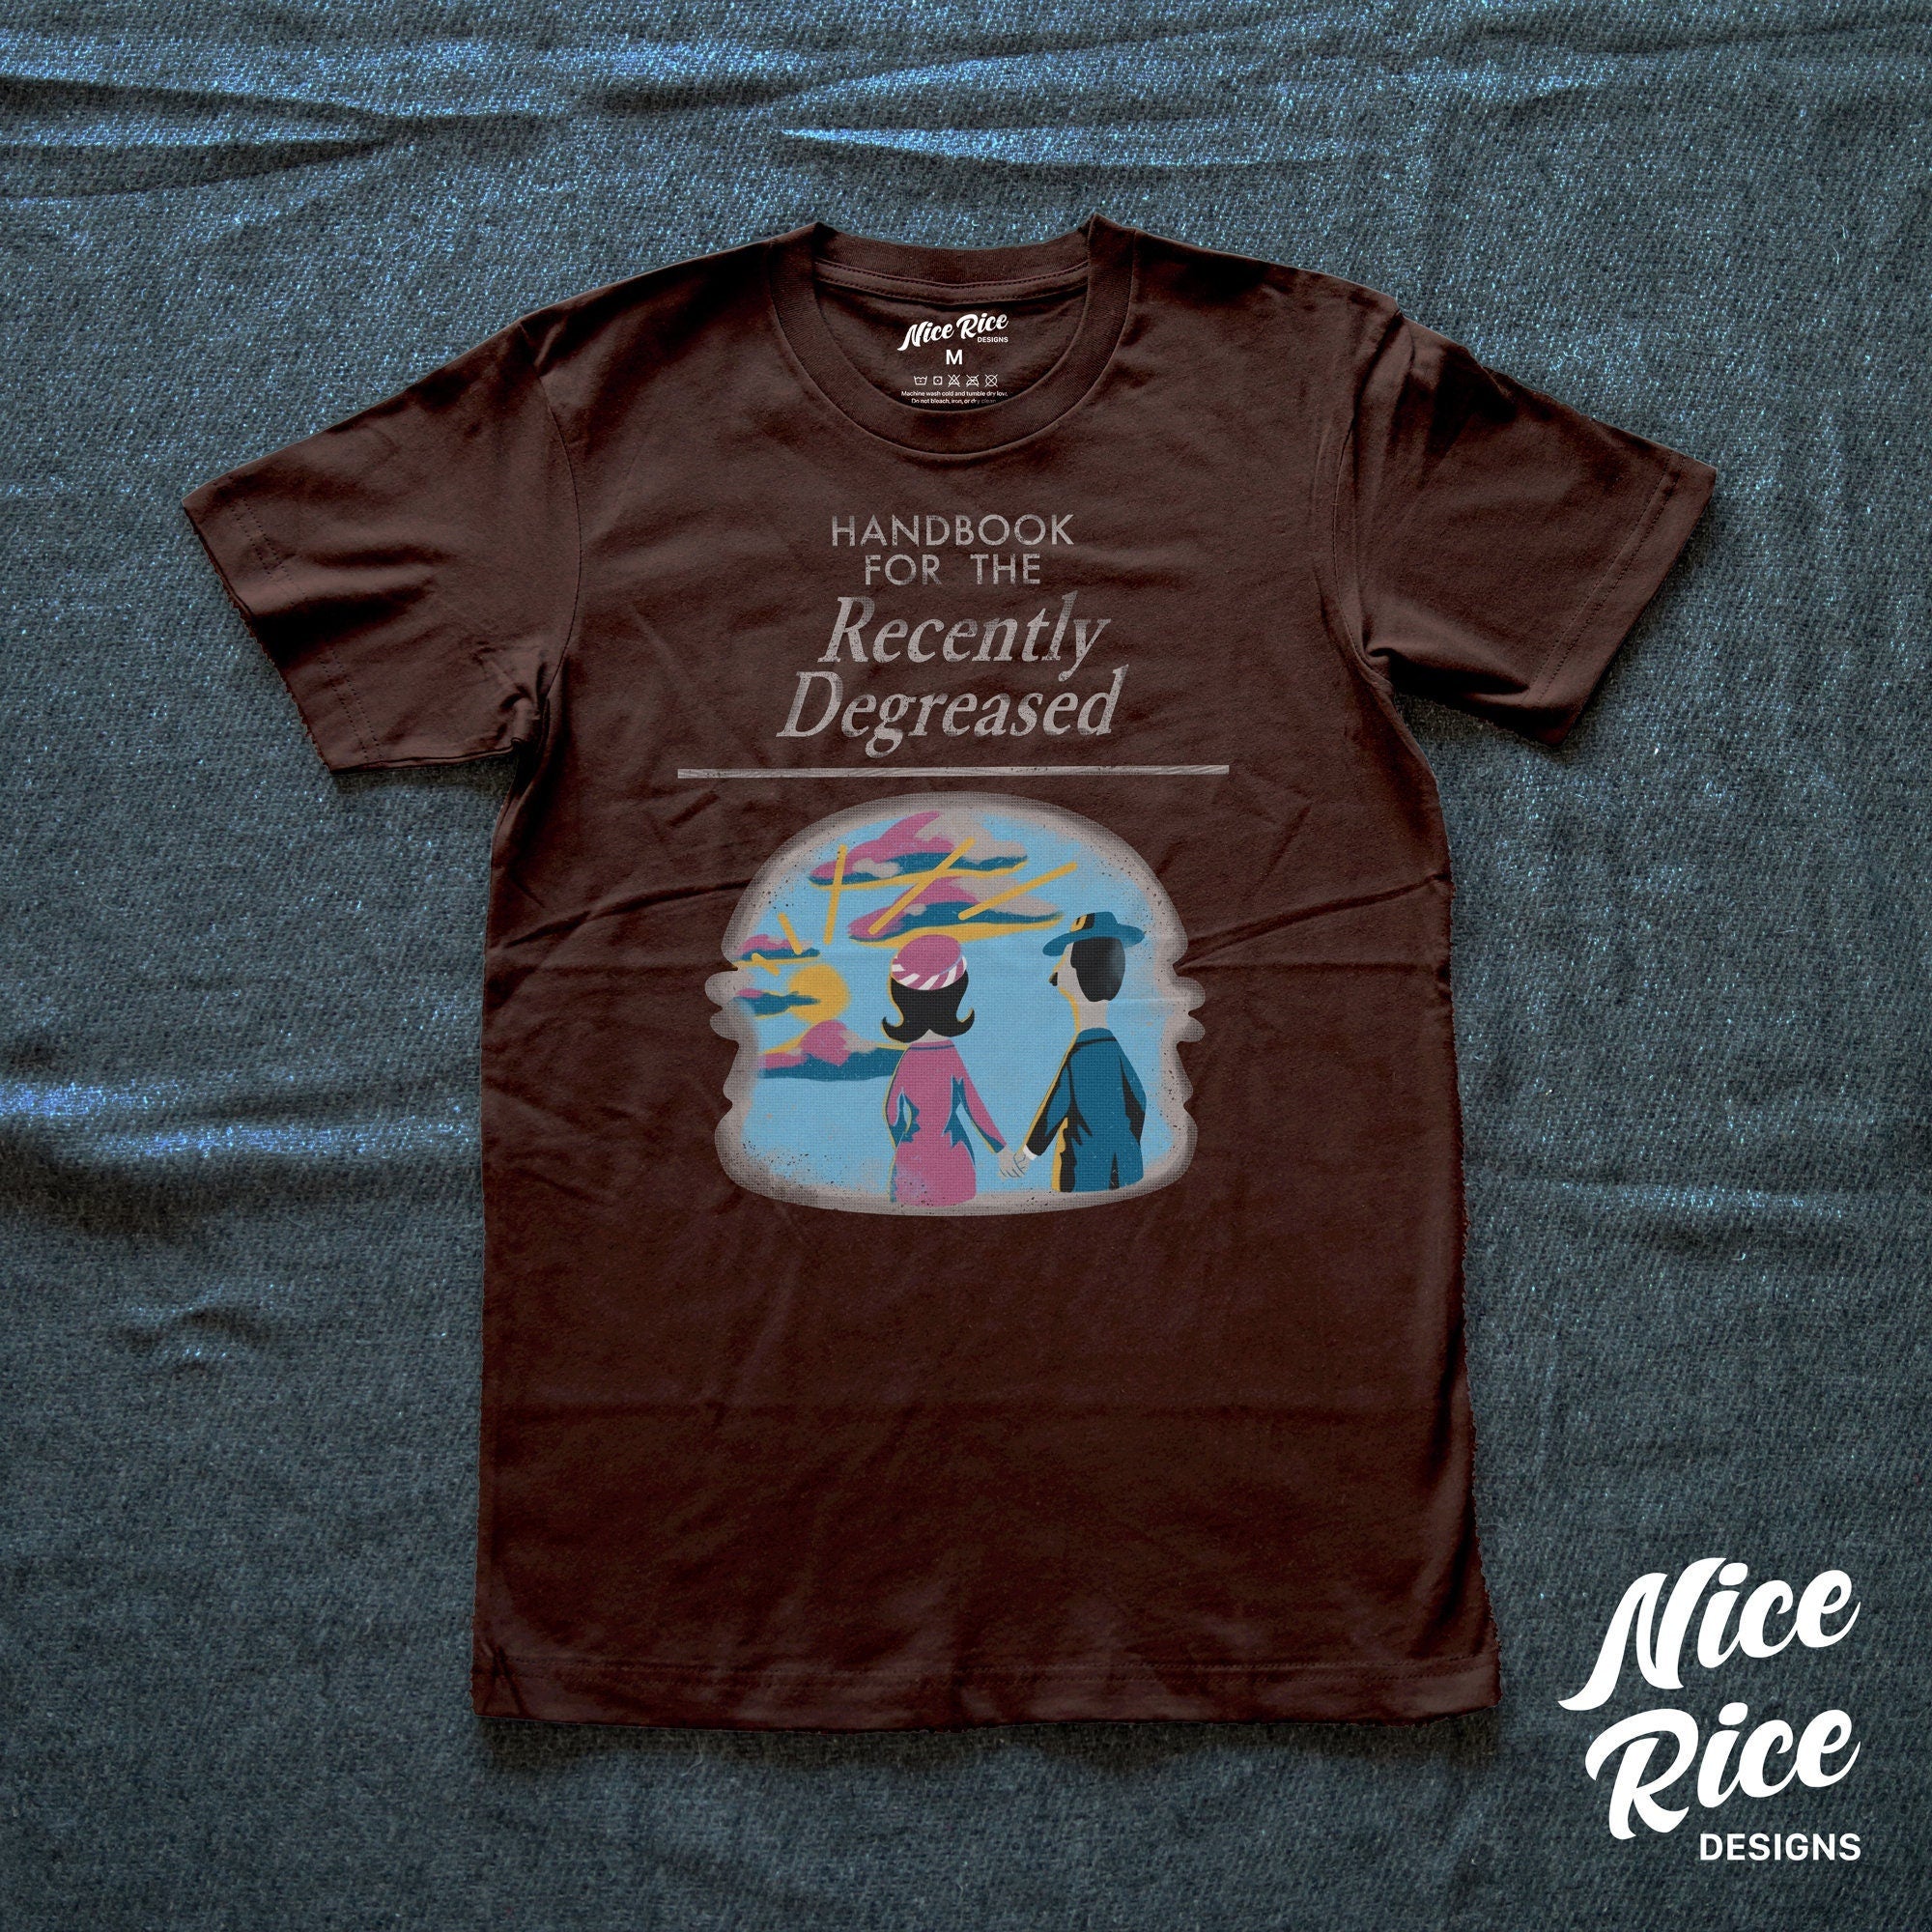 Recently Degreased Shirt by Nice Rice Designs